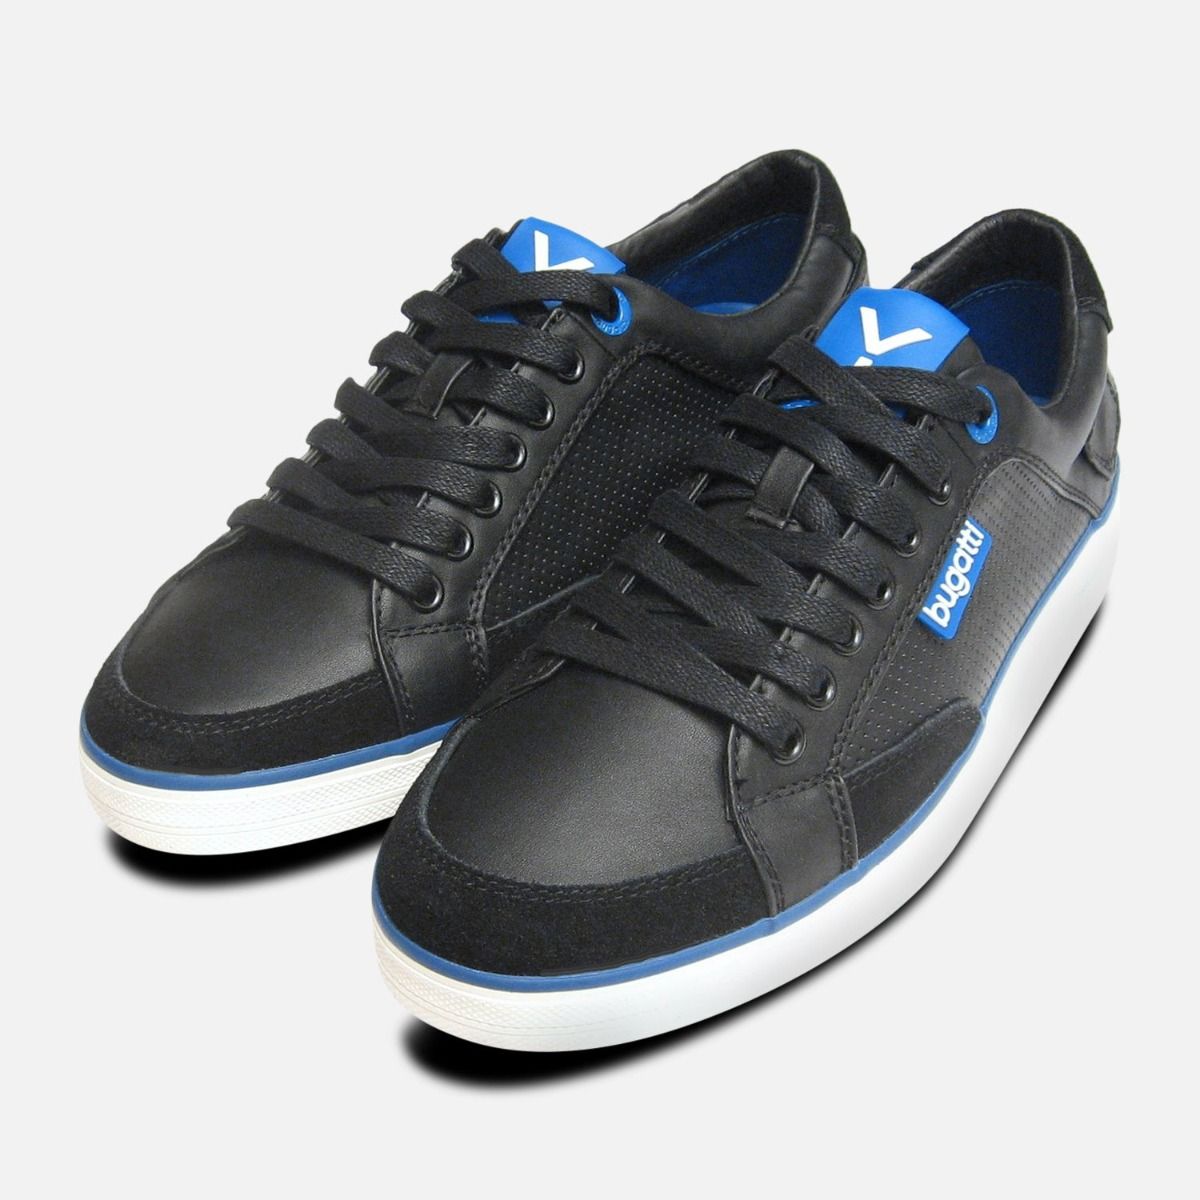 mens branded trainers